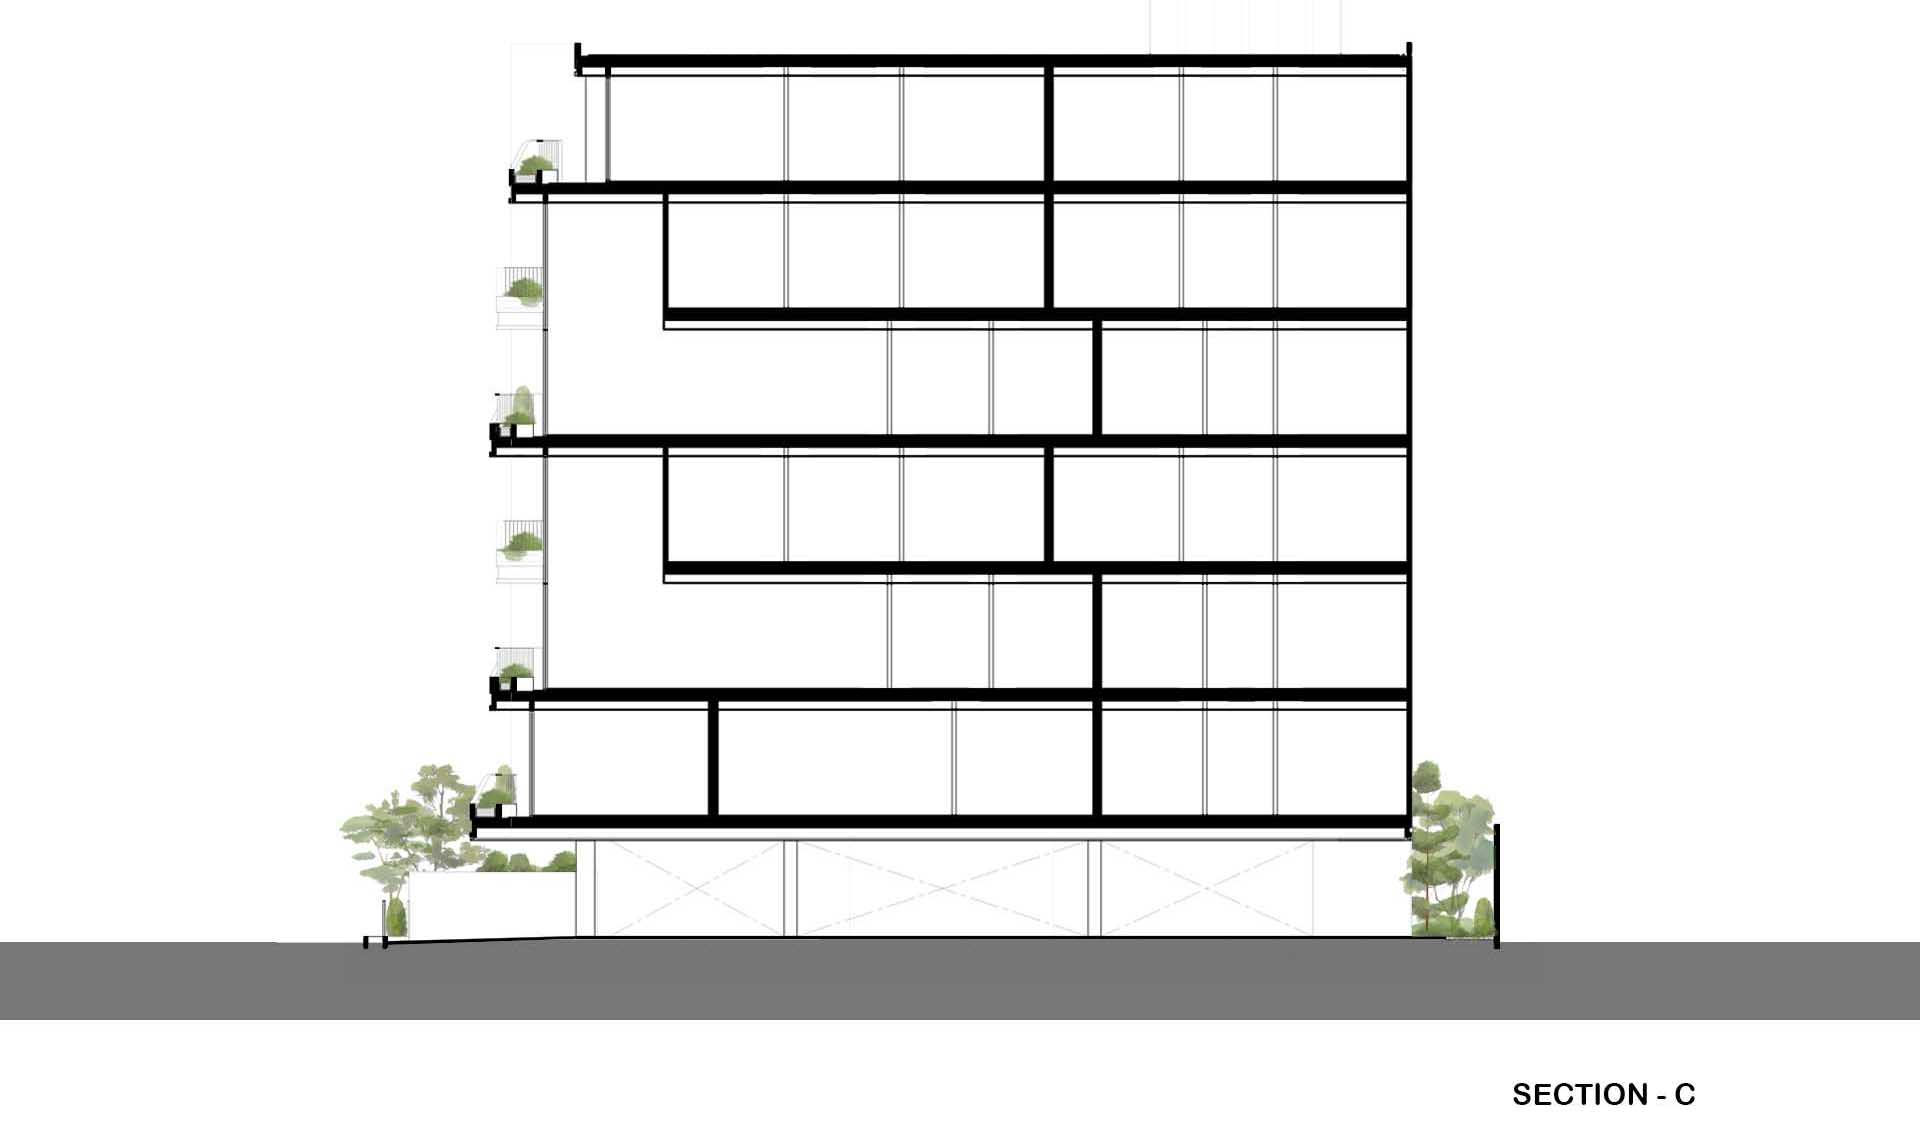 The section diagram of a modern condo building.